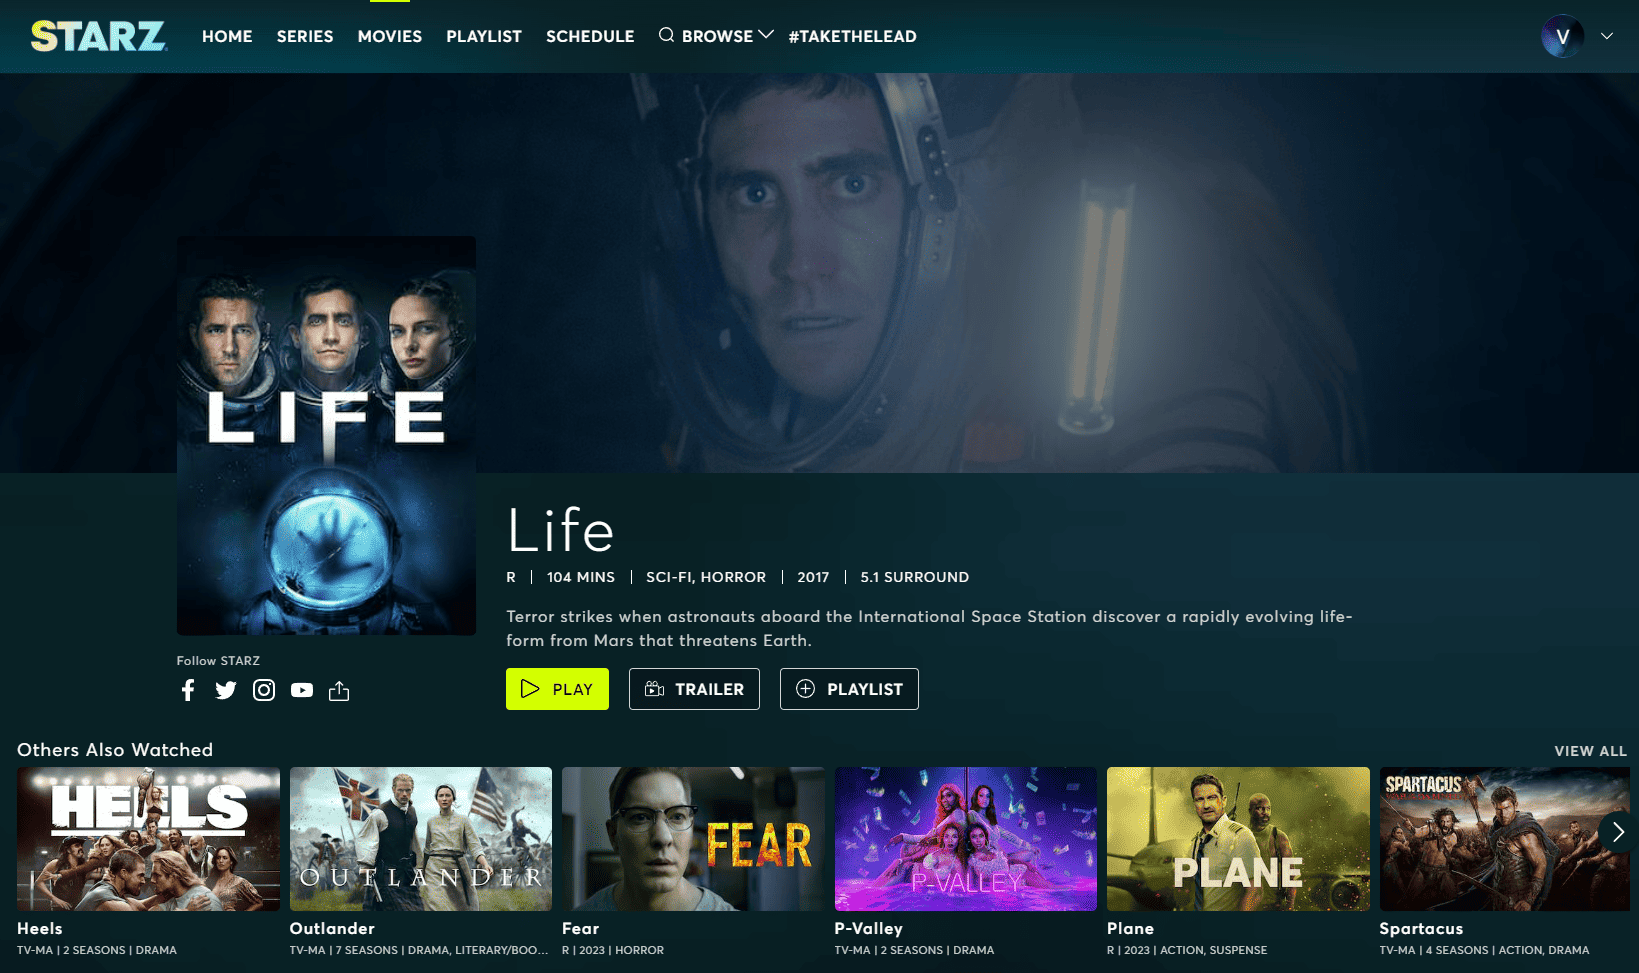 A screenshot of the “Life” movie title card and a list of other movies under the “Movie” tab on STARZ